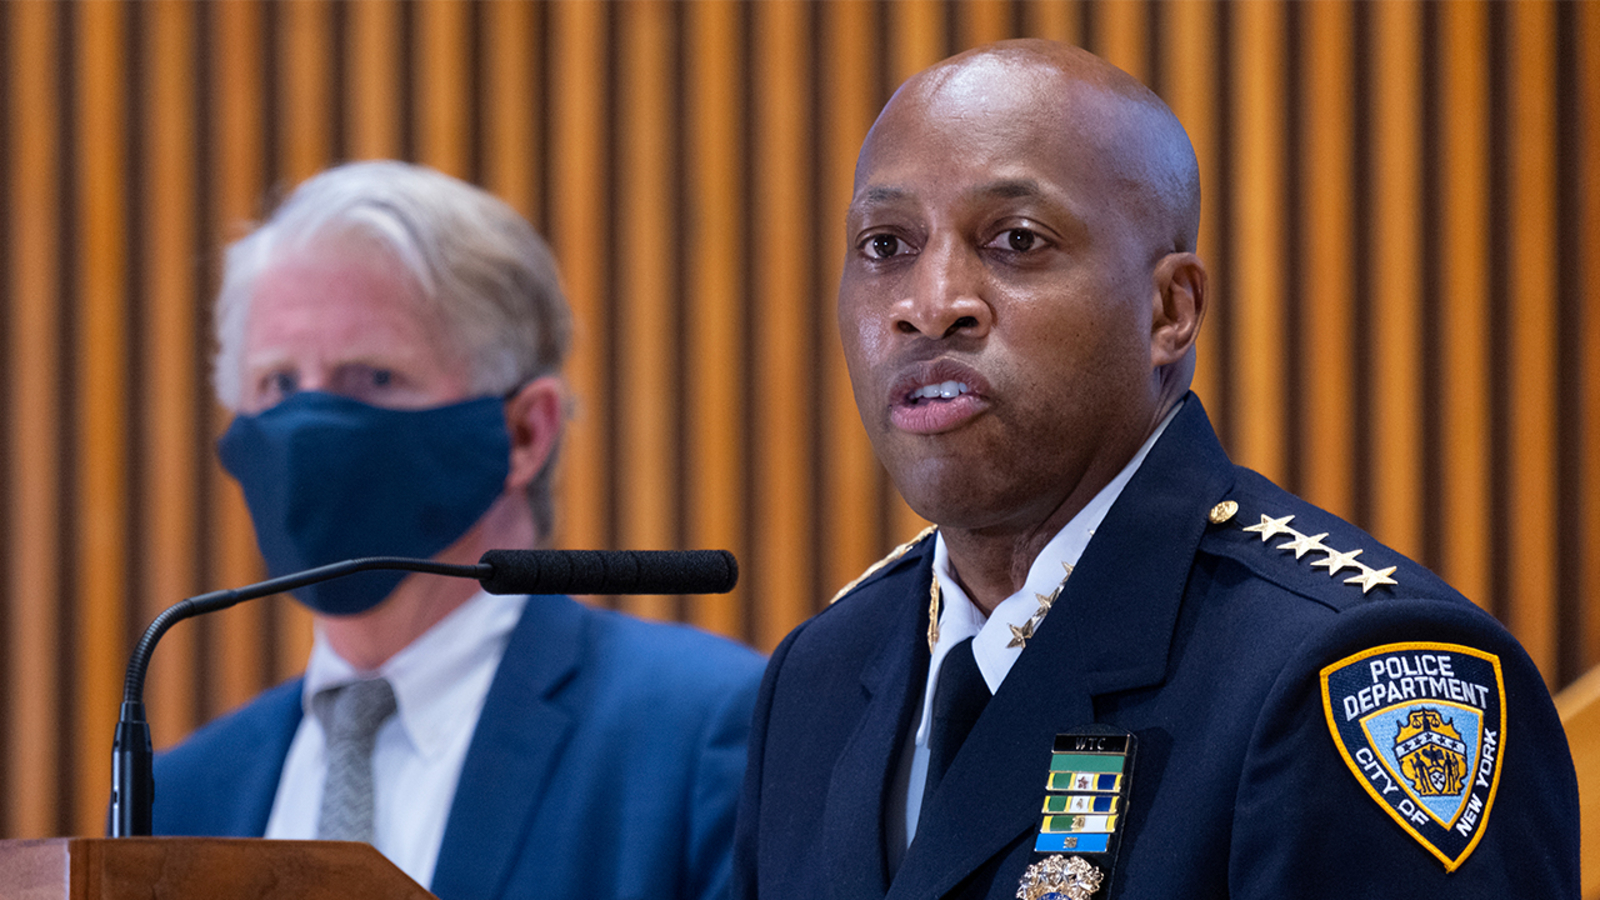 Rodney Harrison says he will be “stepping down” as Suffolk County police commissioner